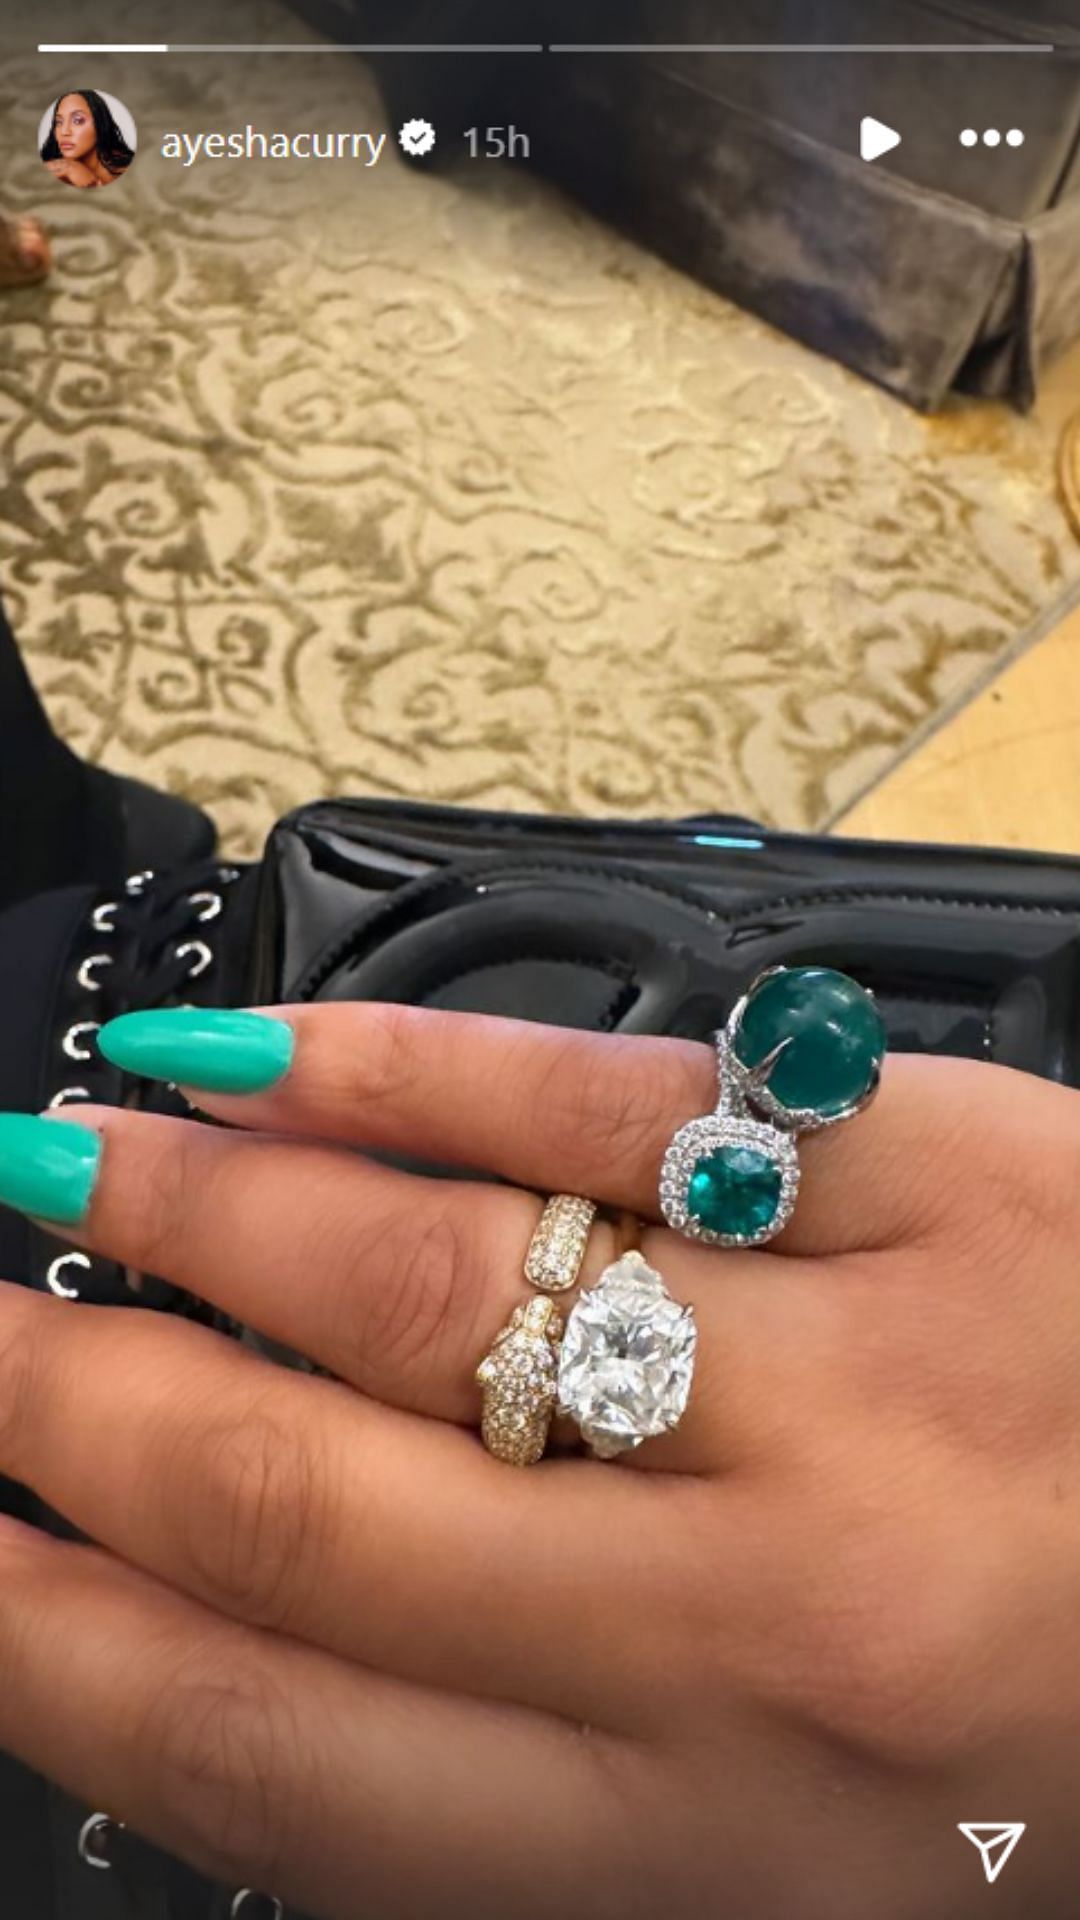 Ayesha Curry&#039;s Instagram story featuring her luxurious Emerald ring